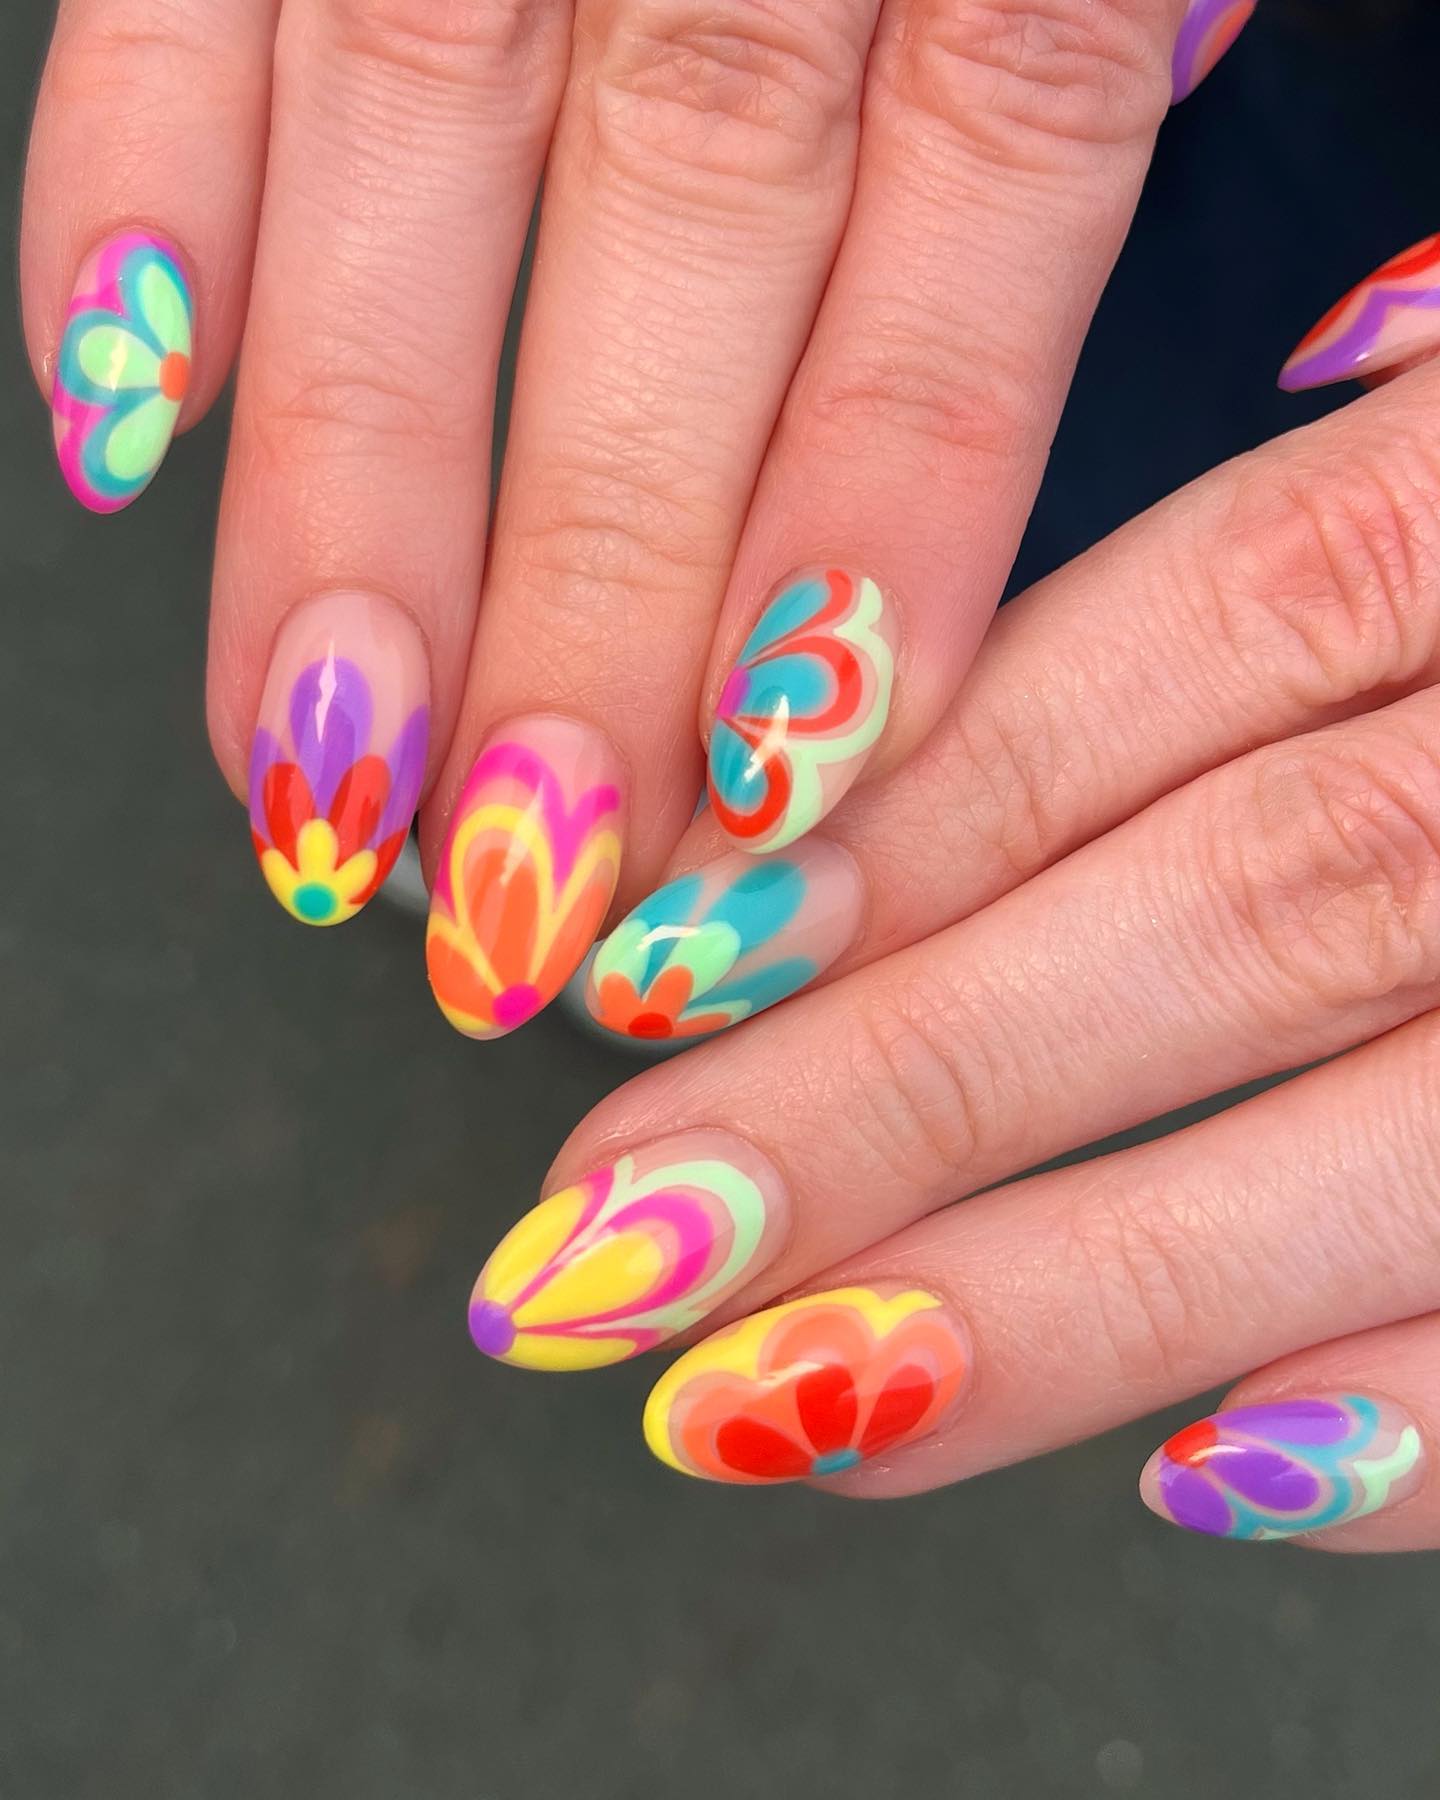 DIY Floral Nail Art – Hand Painted Flower Accent Nails Manicure for Spring